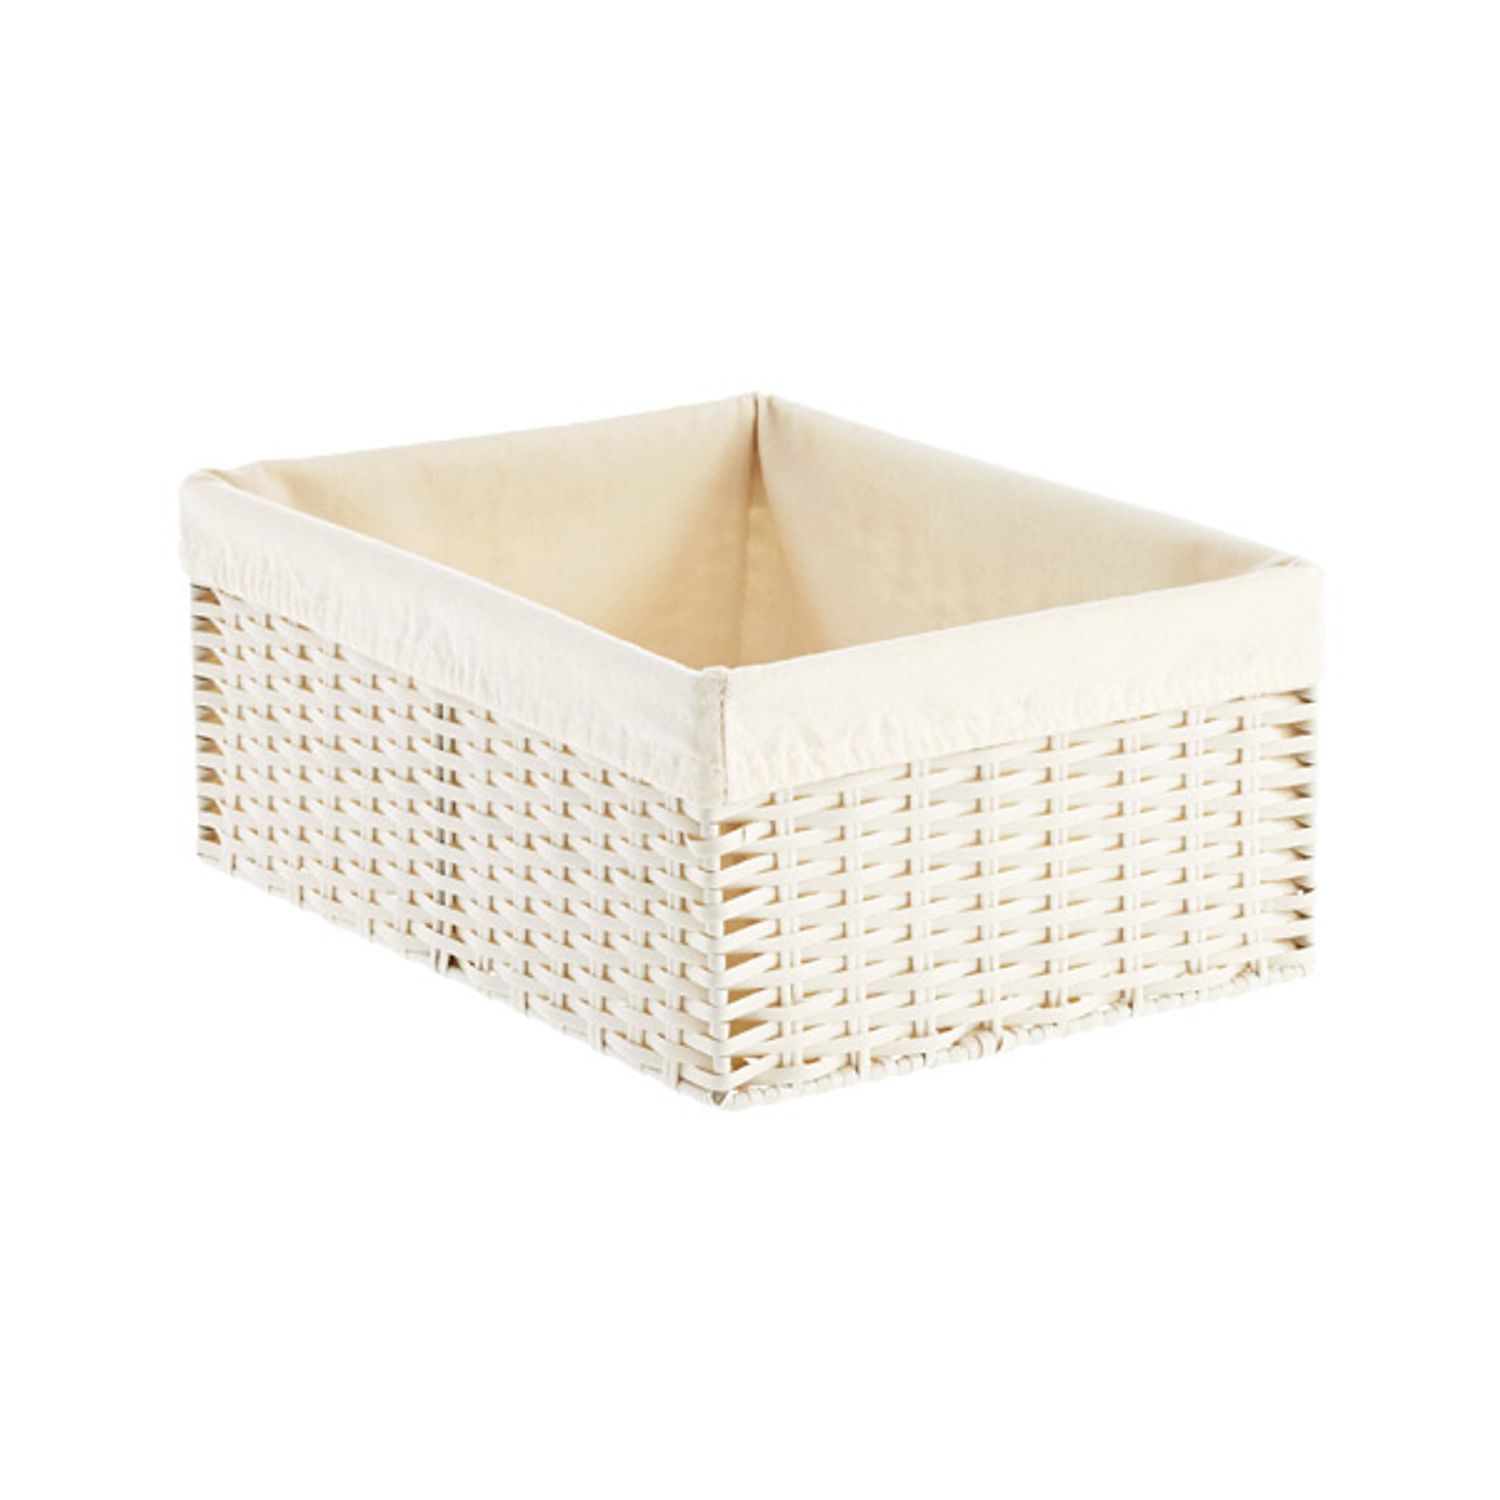 Shop Montauk Rectangular Bins from The Container Store on Openhaus